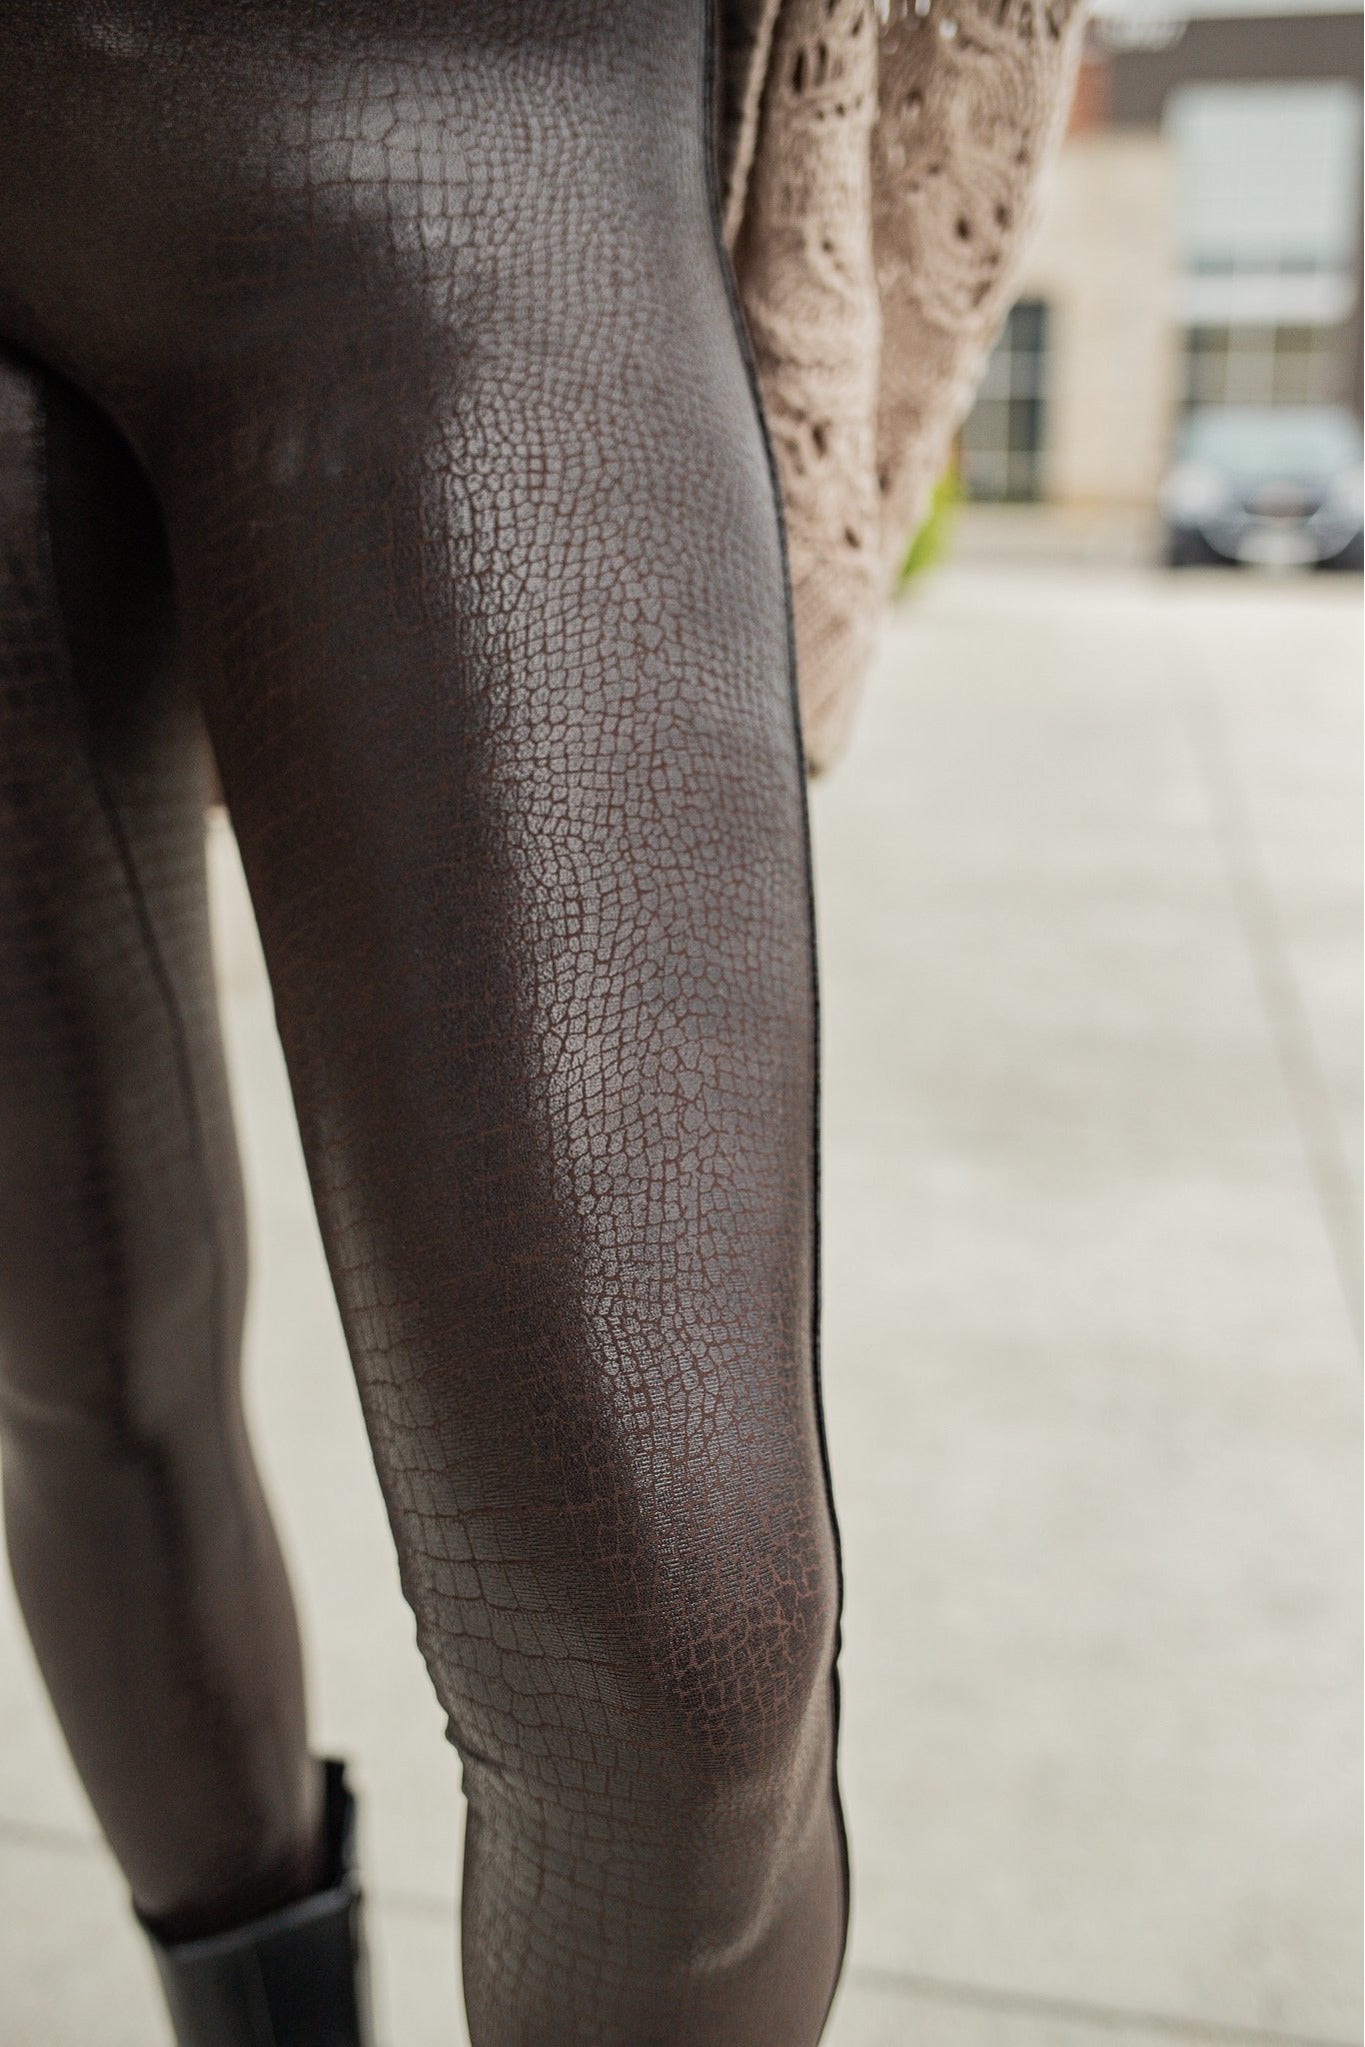 SPANX - @kristincpressley is proving that Limited Edition Faux Leather Croc  Shine Leggings are all they're “croc-ed” up to be!